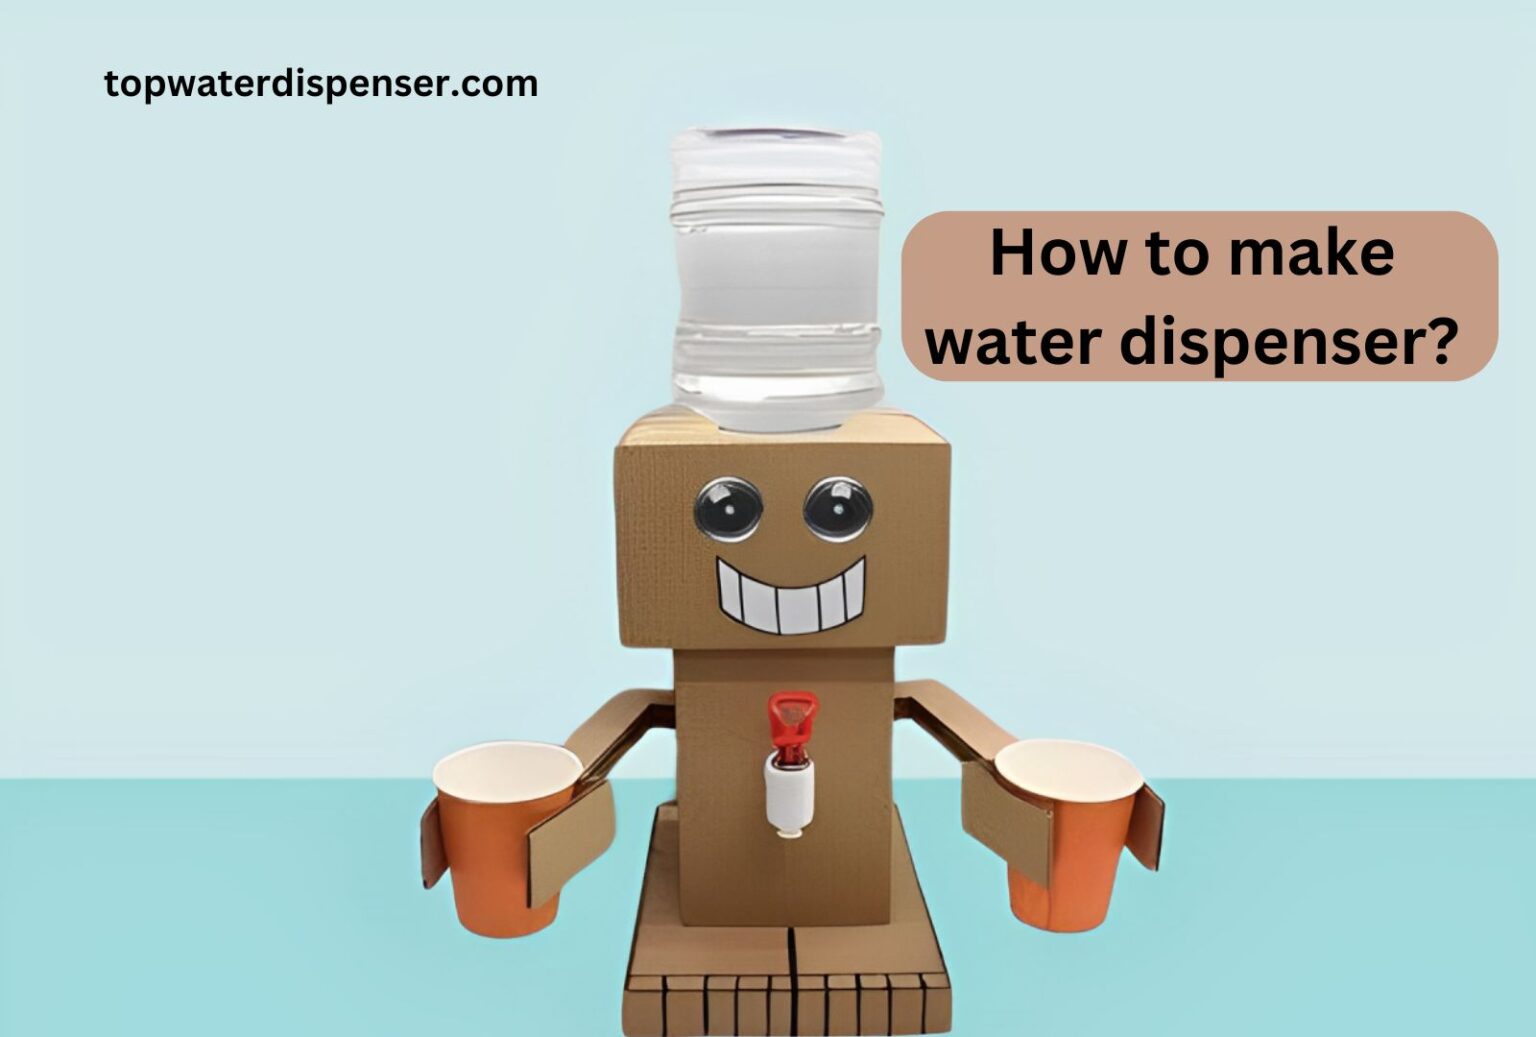 How to make water dispenser?